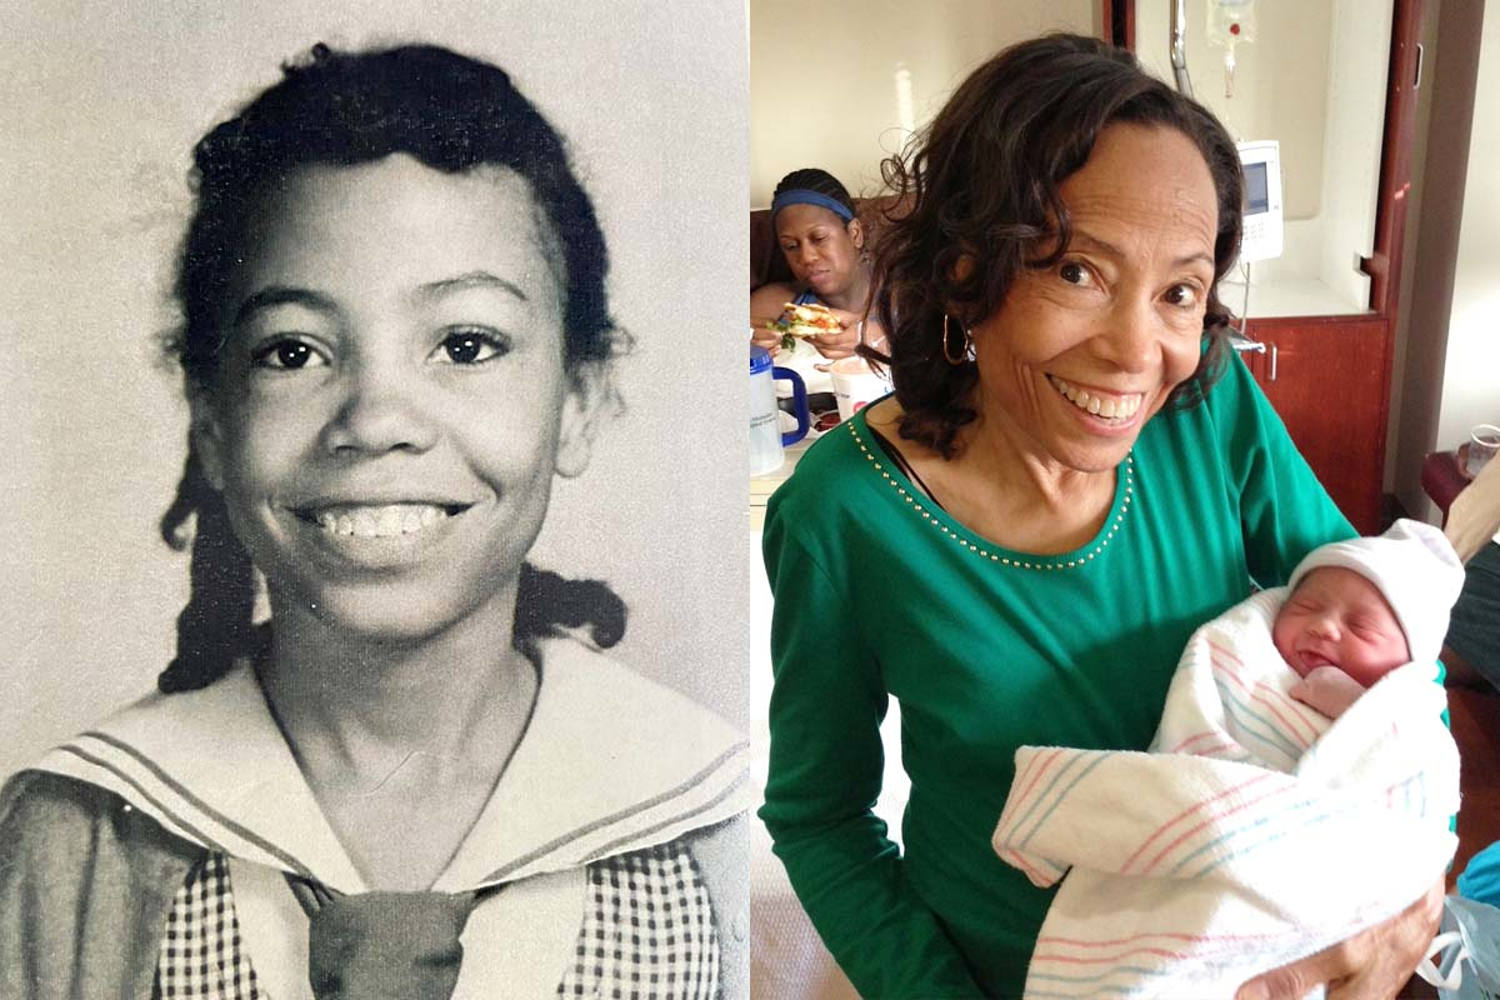 Woman with sickle cell disease celebrates 80th birthday, defying life expectancy odds by decades